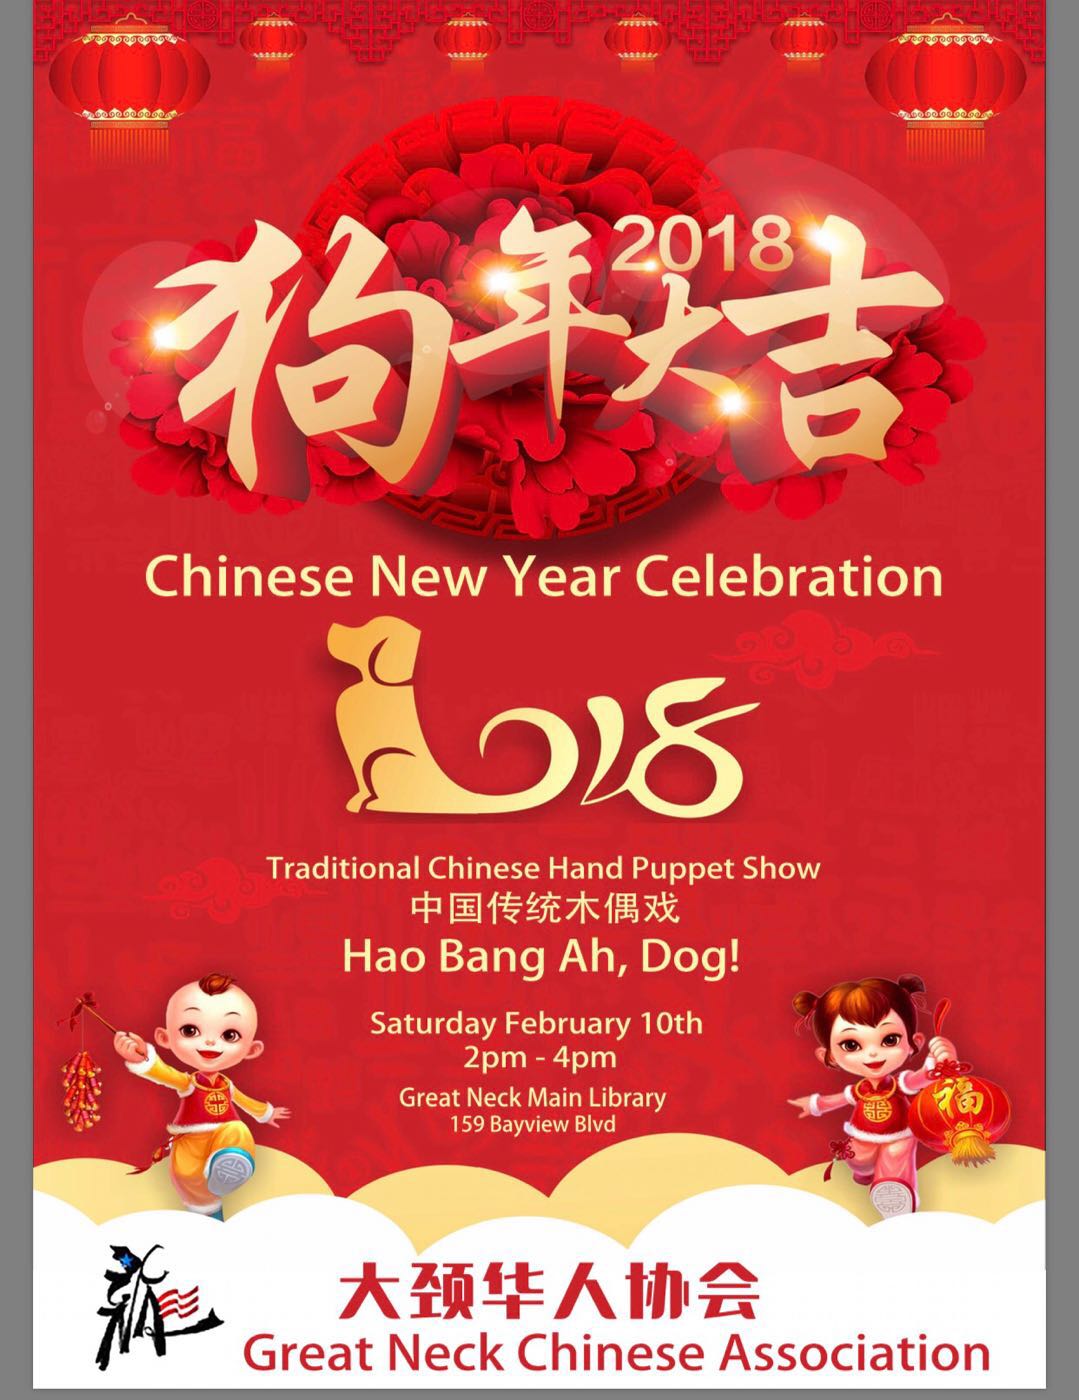 The Great Neck Chinese Association will be hosting a new years event at the Great Neck Library on Feb. 10. (Photo courtesy of Great Neck Chinese Association)